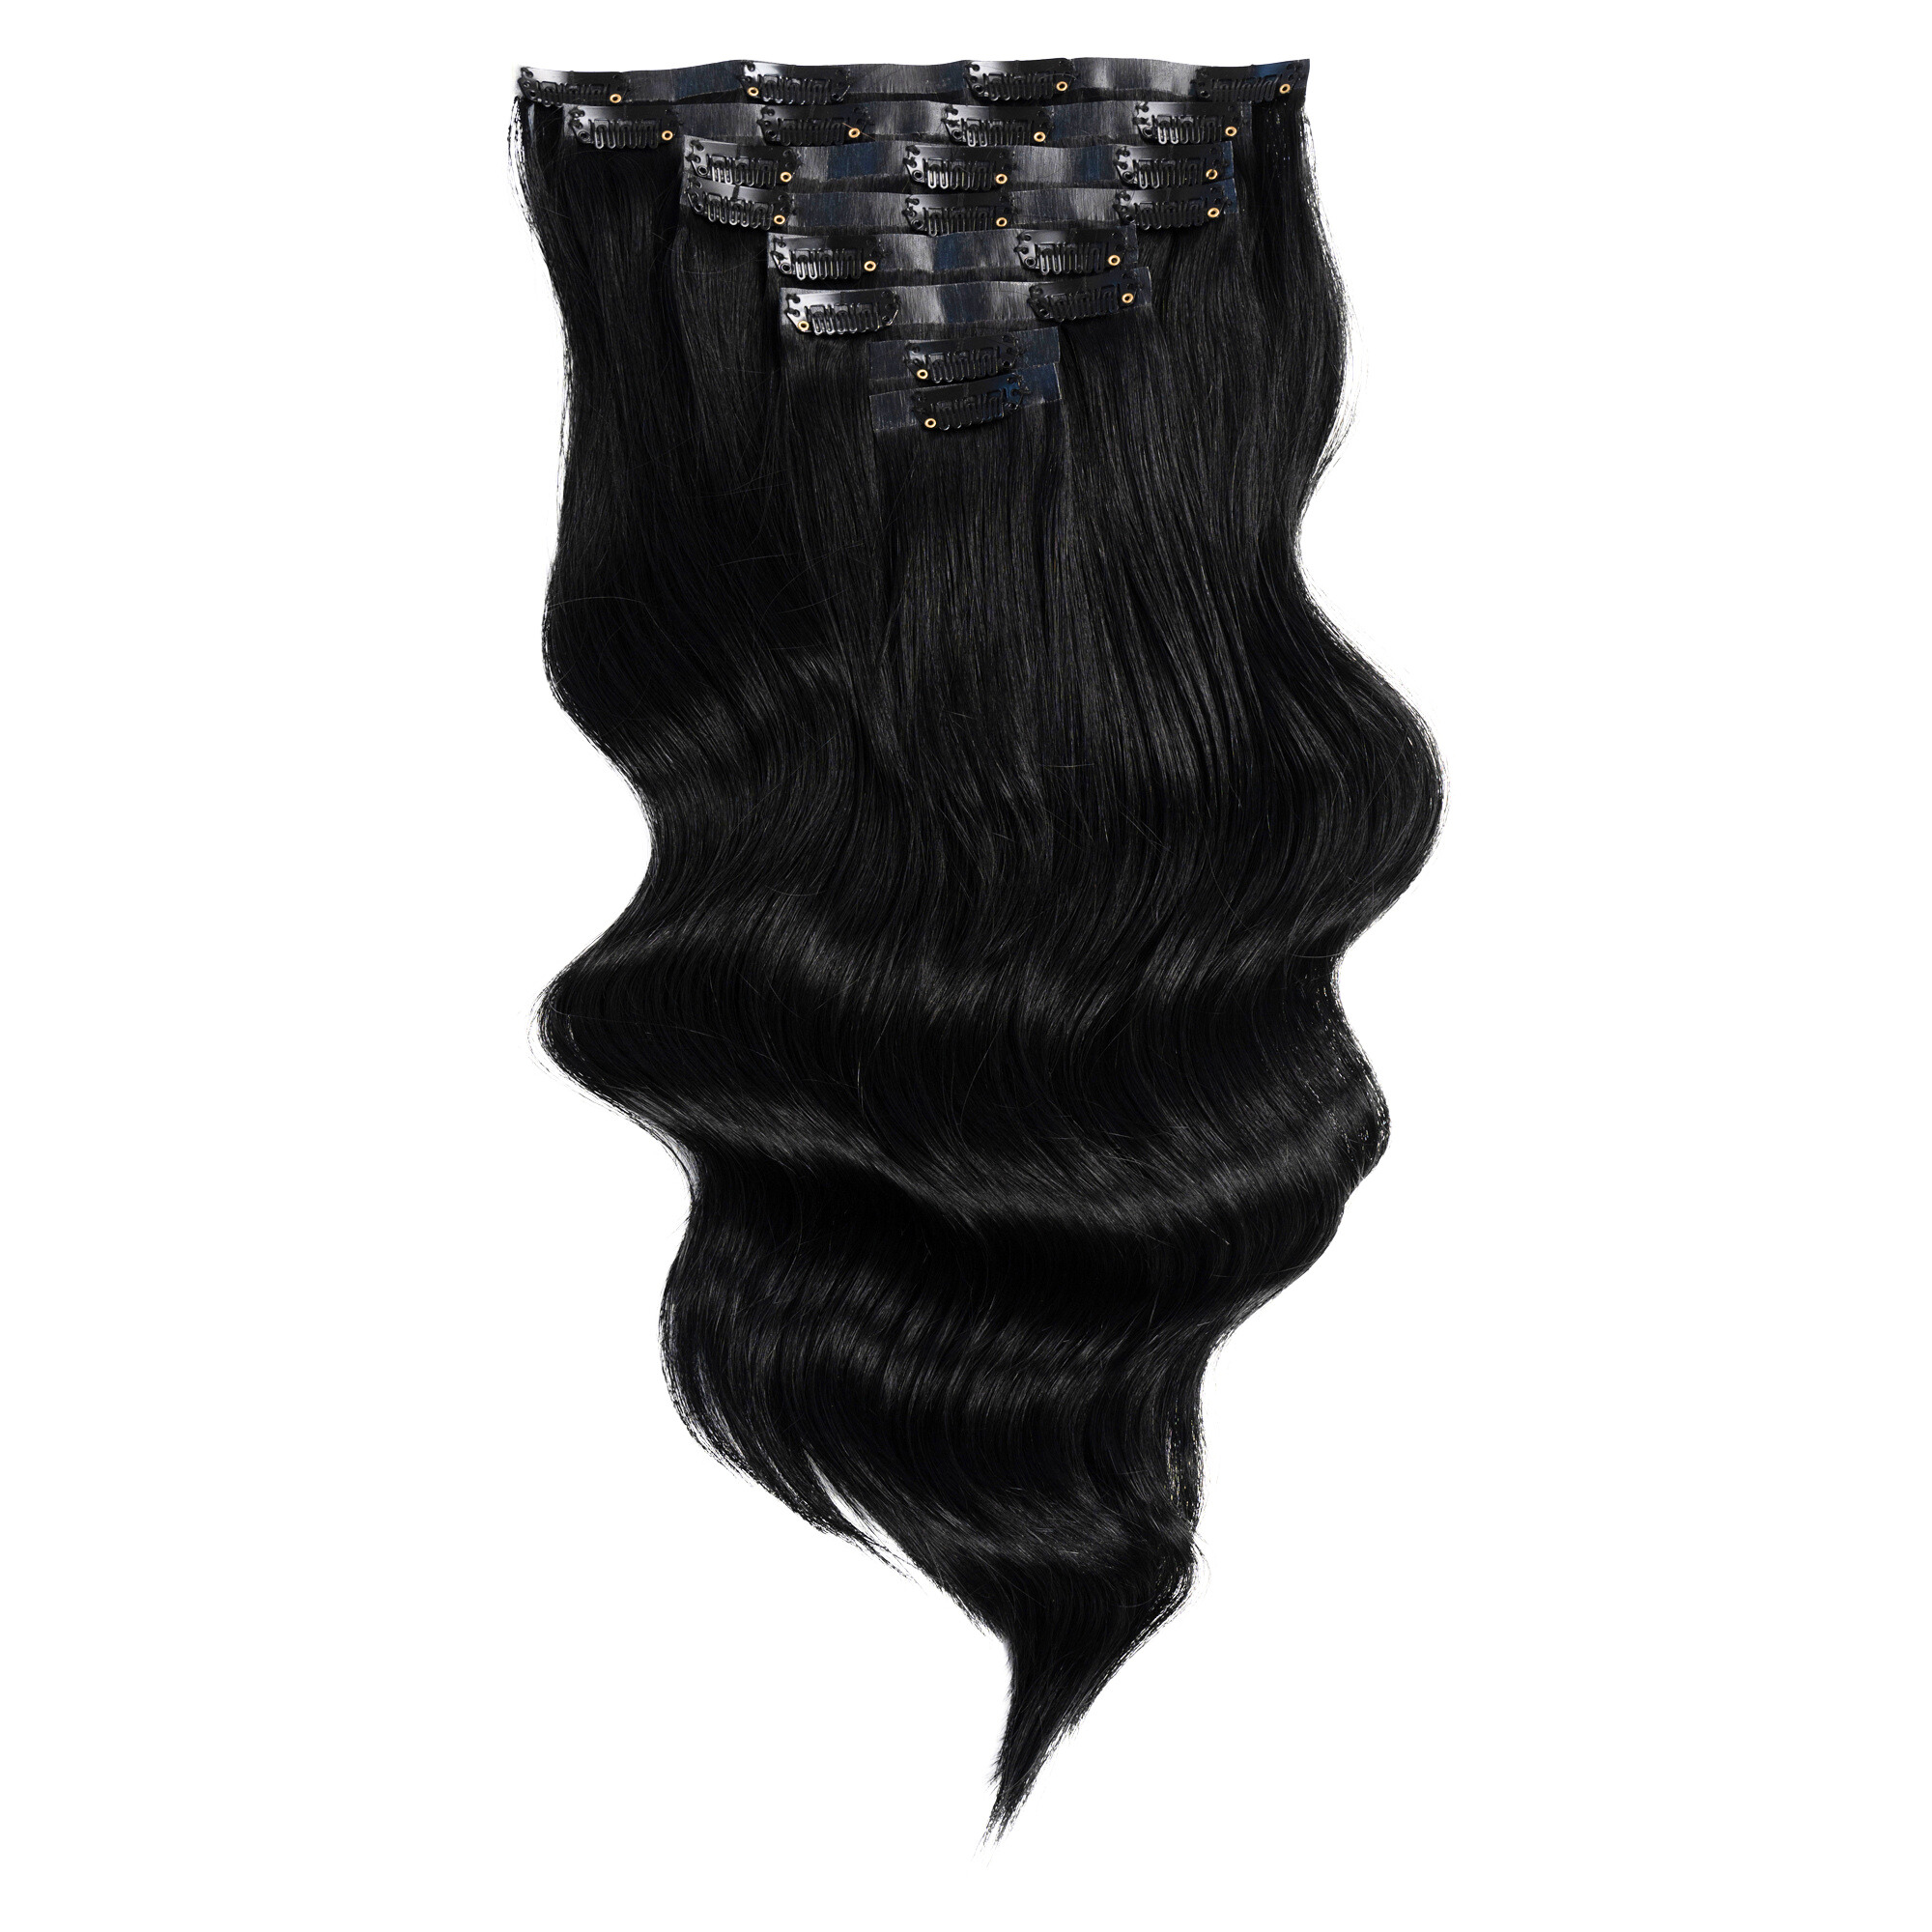 Empress Deluxe Clip-in Hair Extensions 18" Colour 1 Black - Maneology Hair Extensions